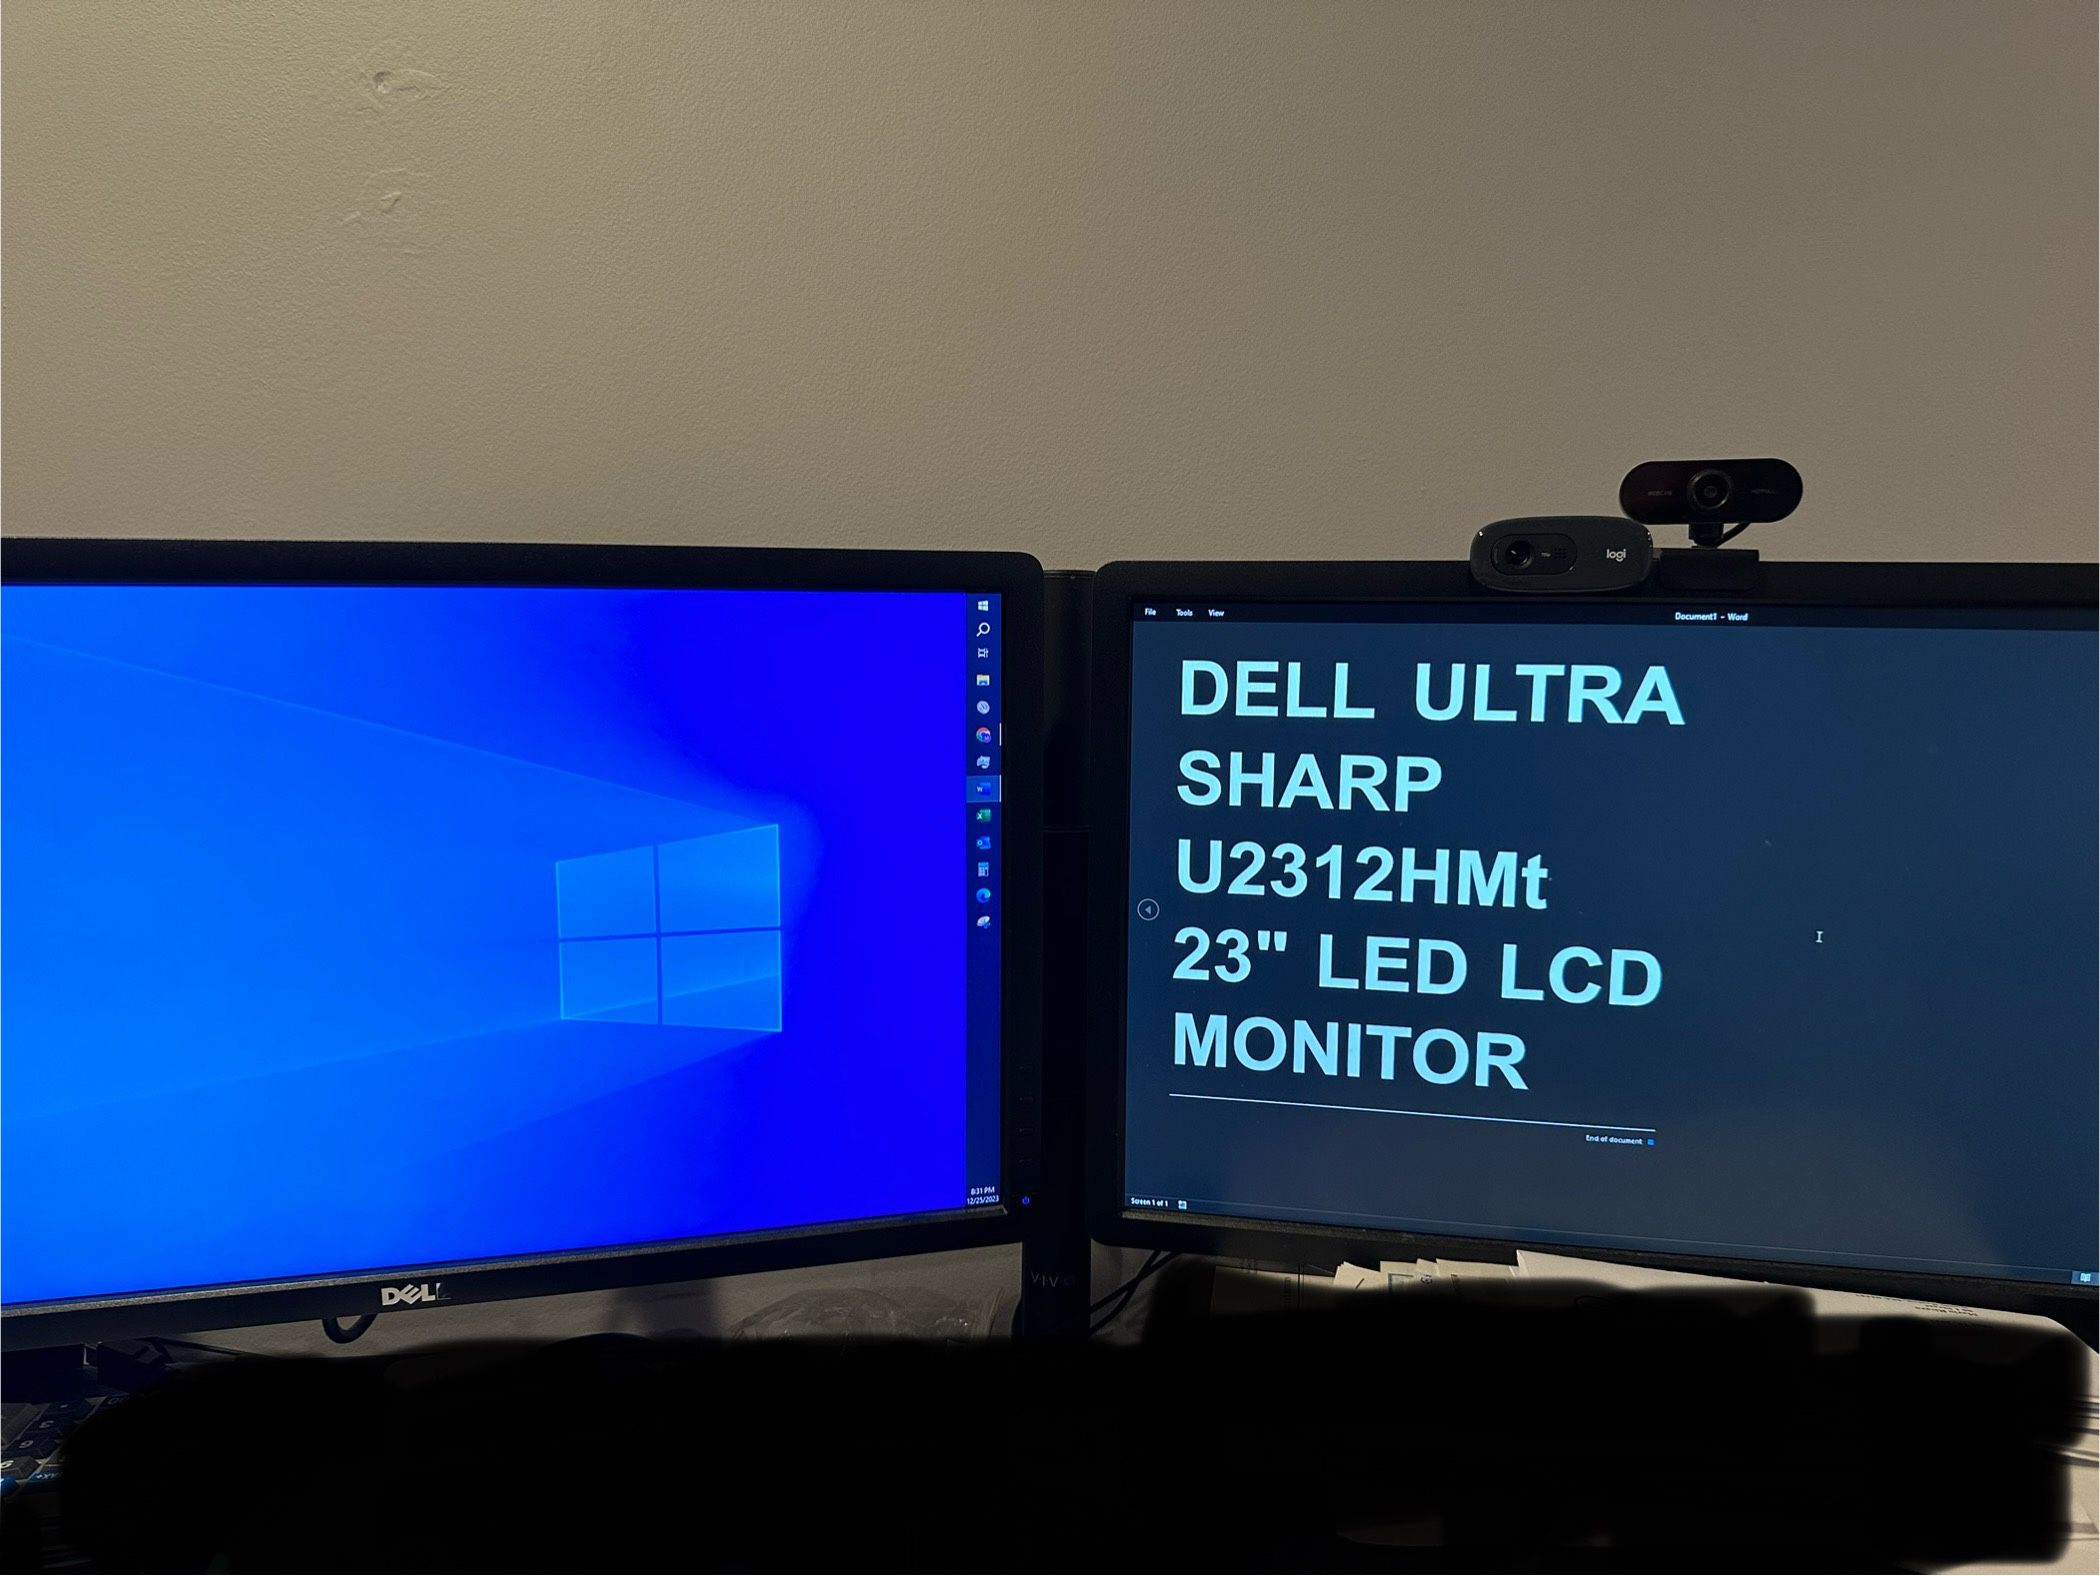 Two Dell Ultra sharp Monitors 23” And Free Logitech Ergo Keyboard And Mouse